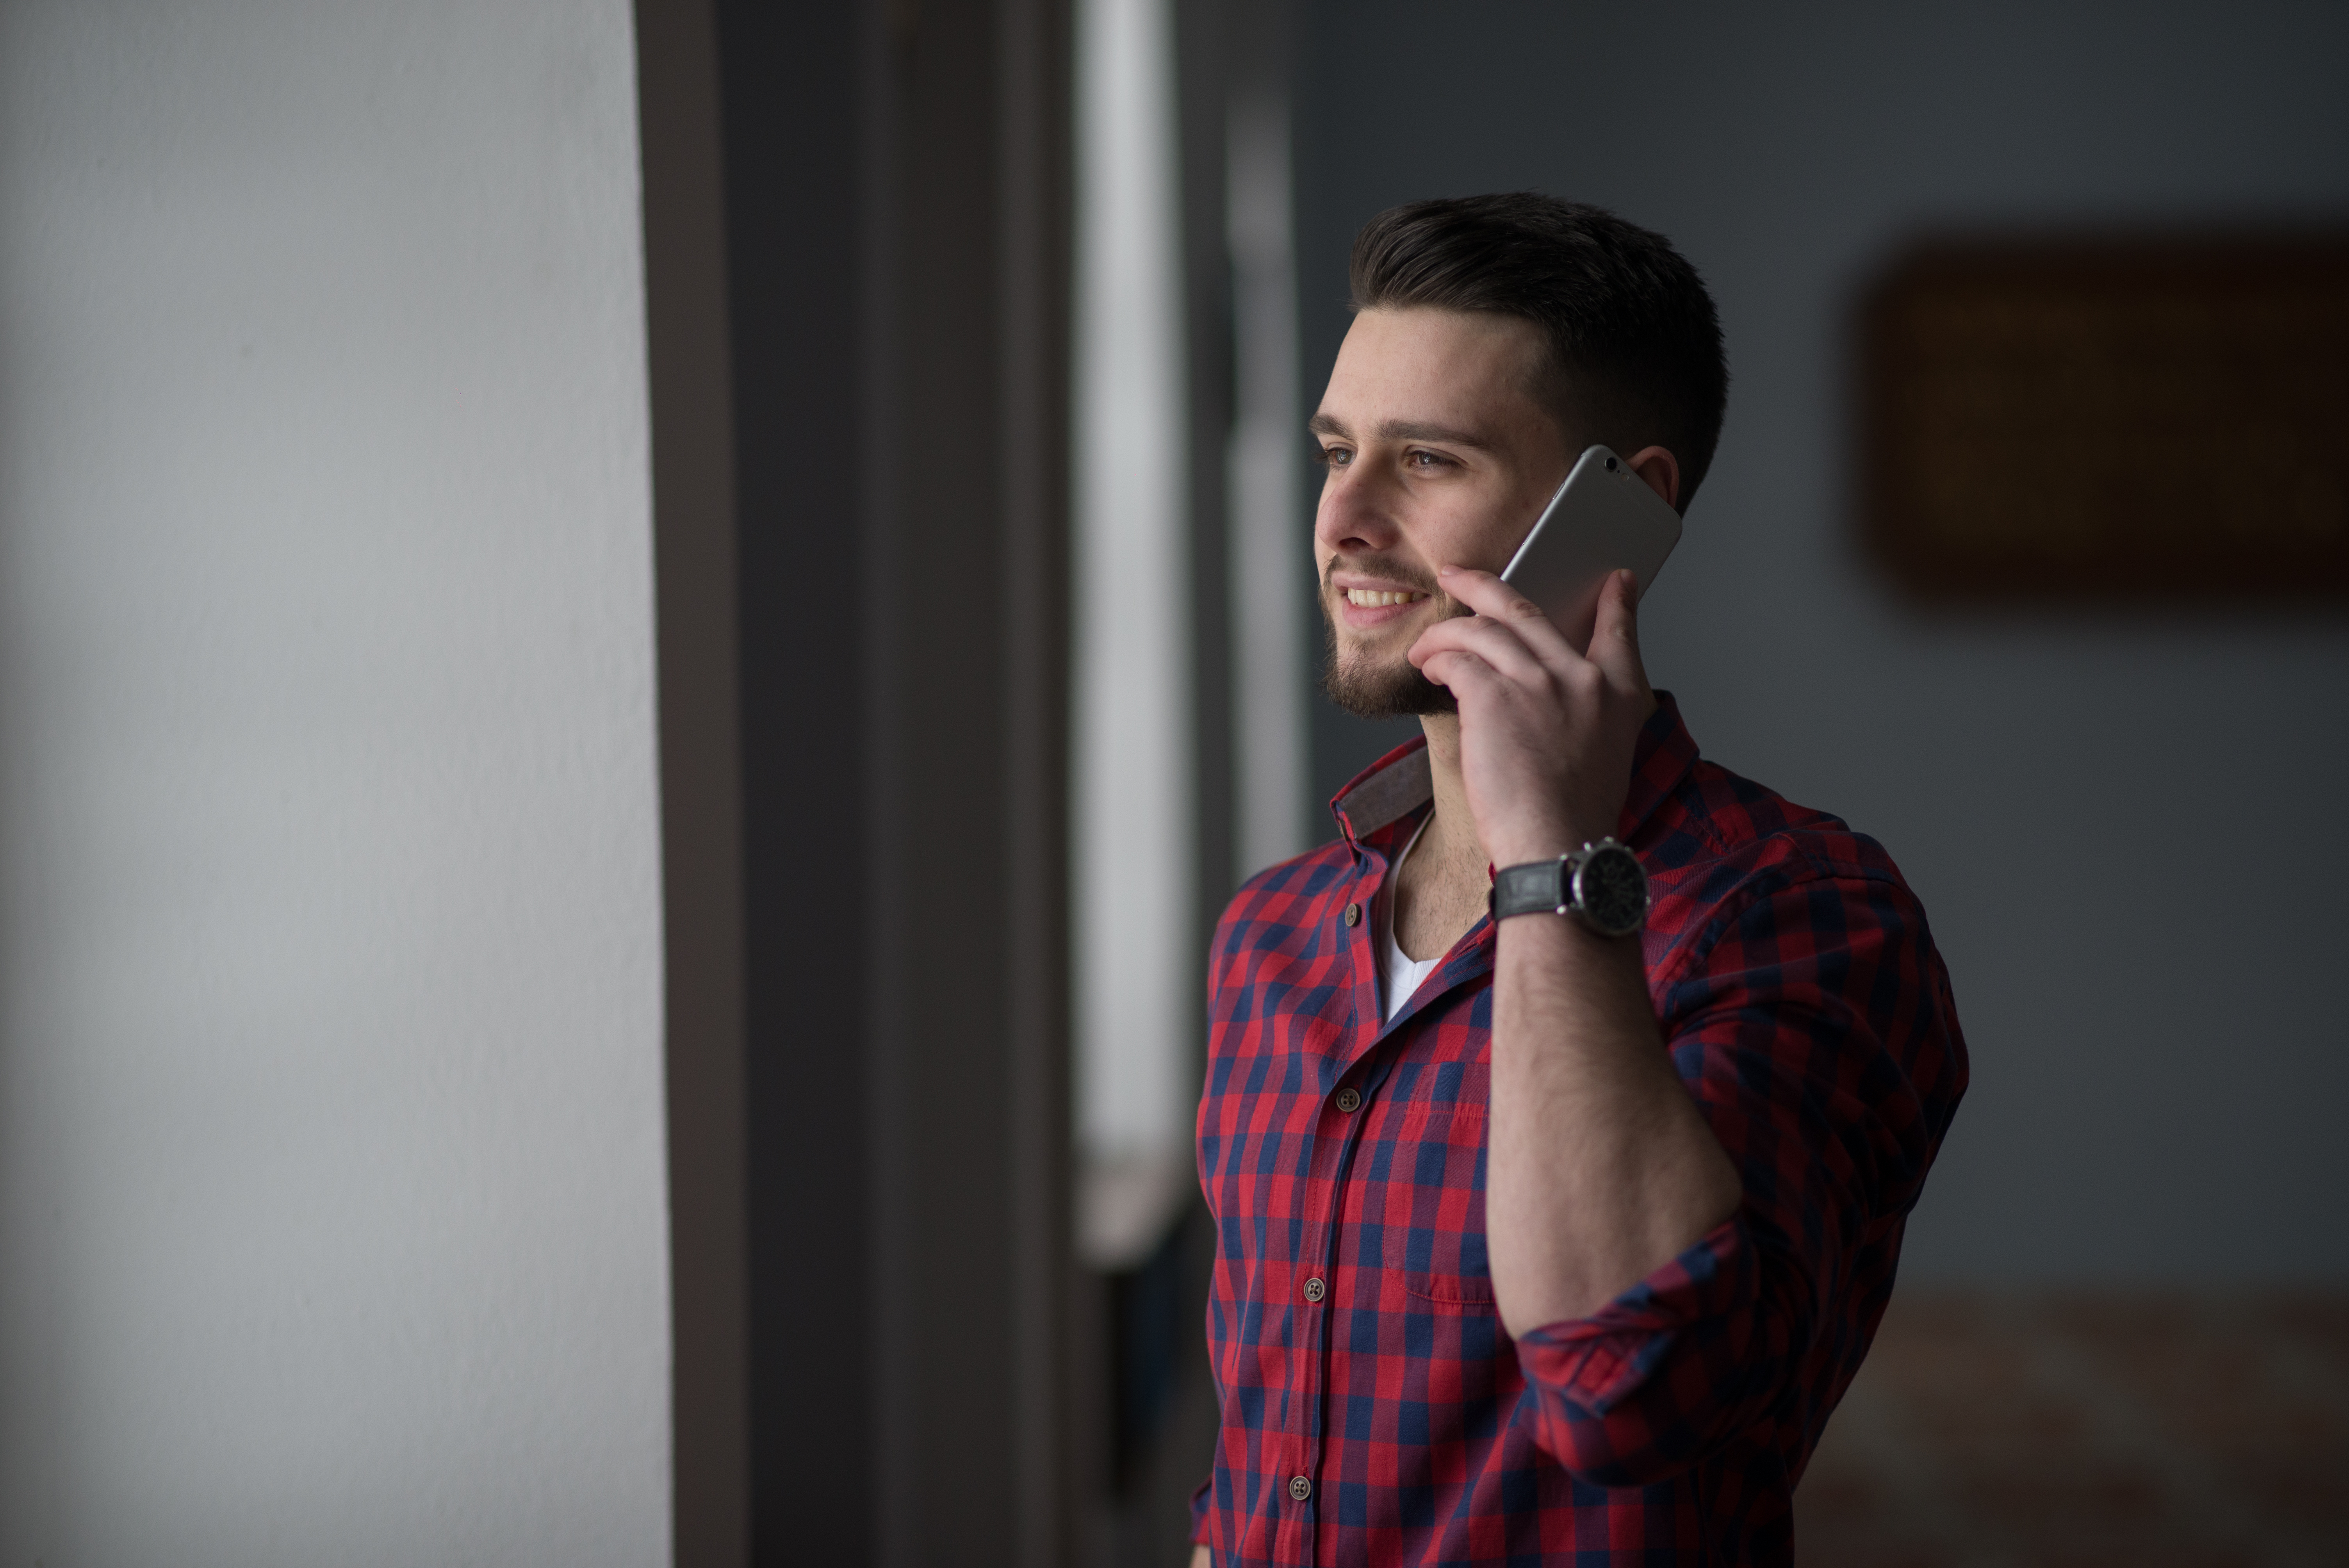 A man talking on the phone | Source: Shutterstock